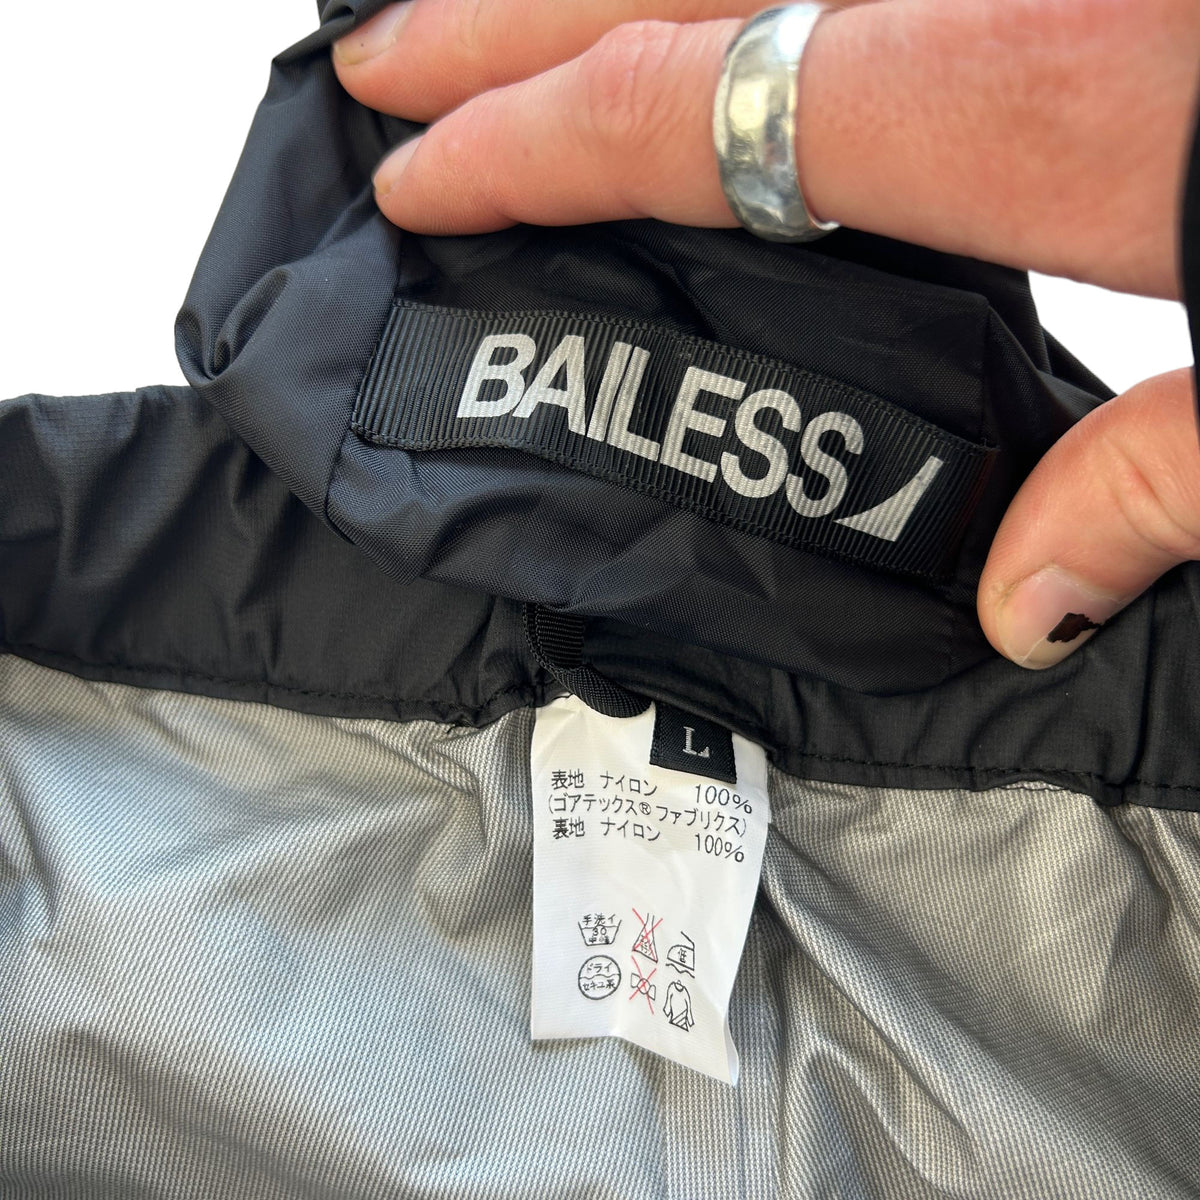 Vintage Bailess Waterproof GORE-TEX Trousers Size L